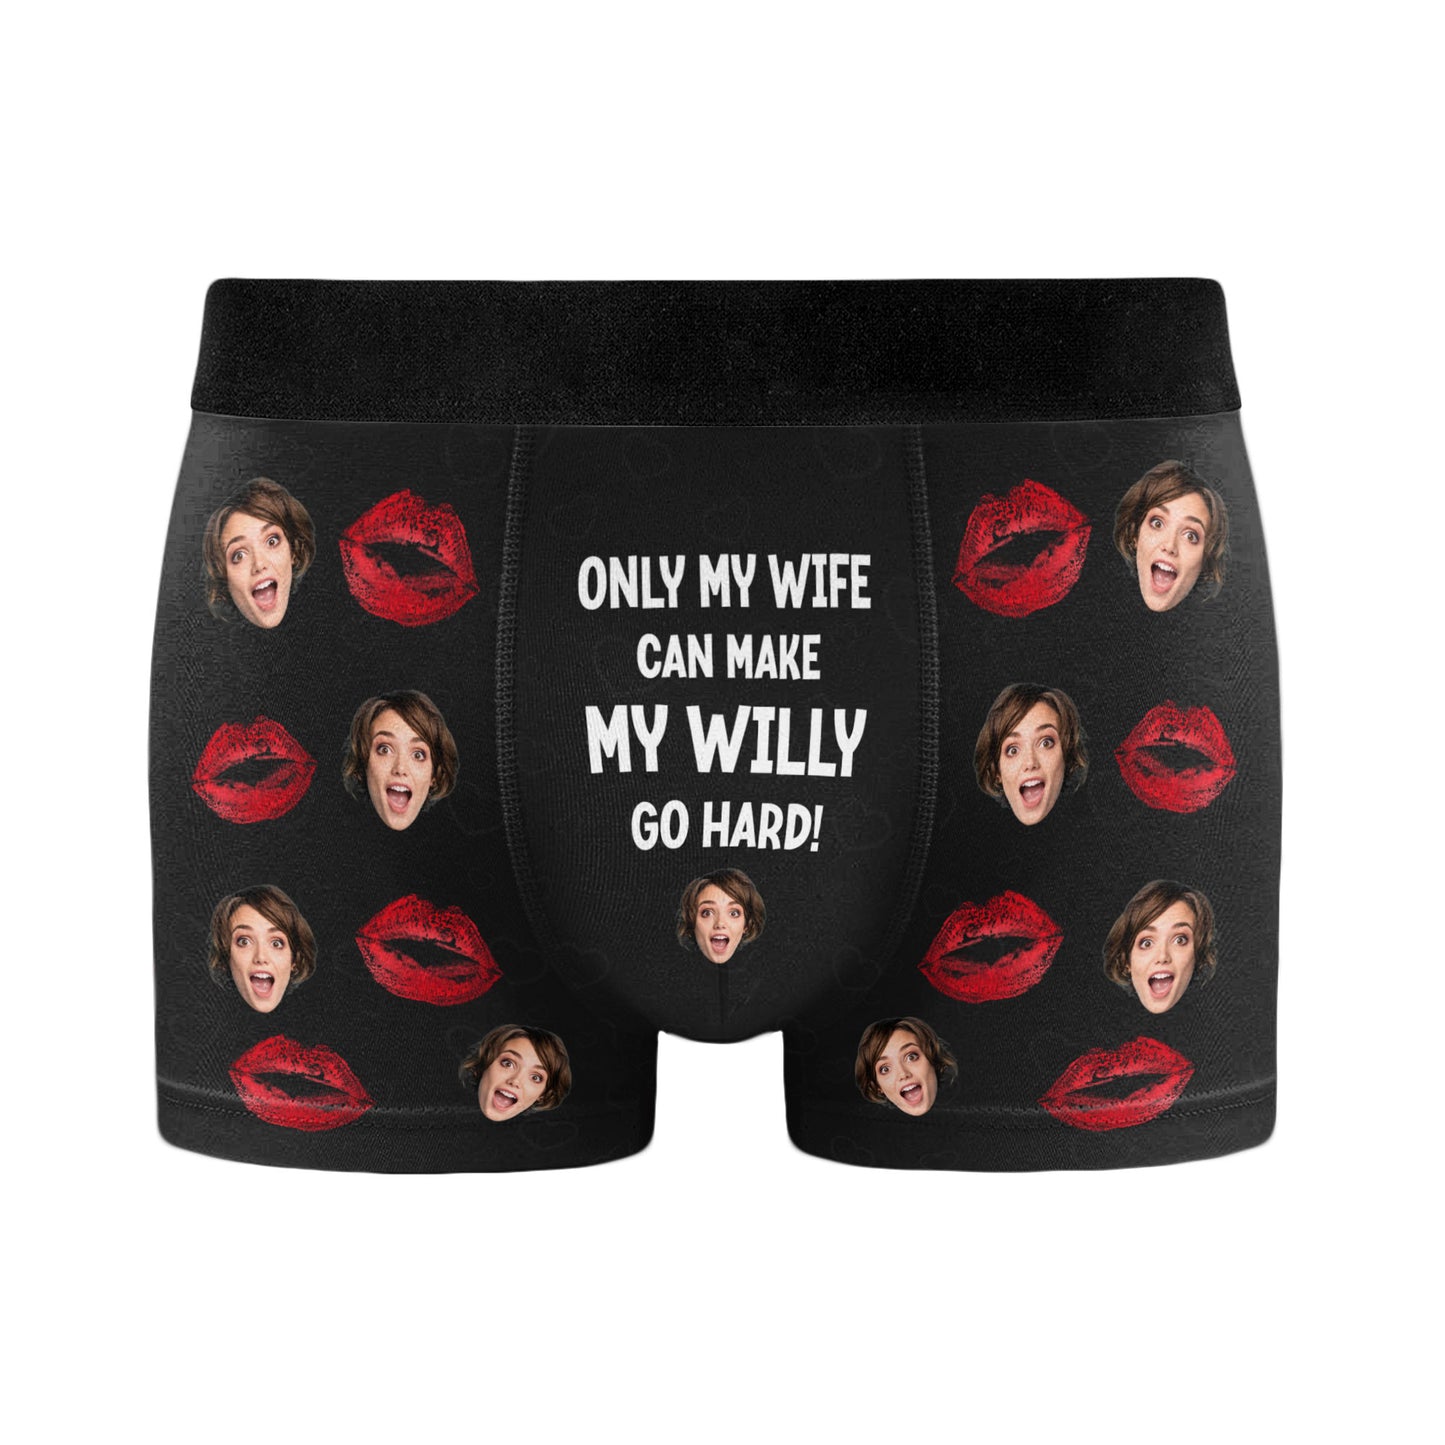 Only My Wife/Girlfriend Can Make My Willy Go Hard - Personalized Men's Boxer Briefs - Birthday, Loving, Anniversary  Gift For Husband, Boyfriend, Men